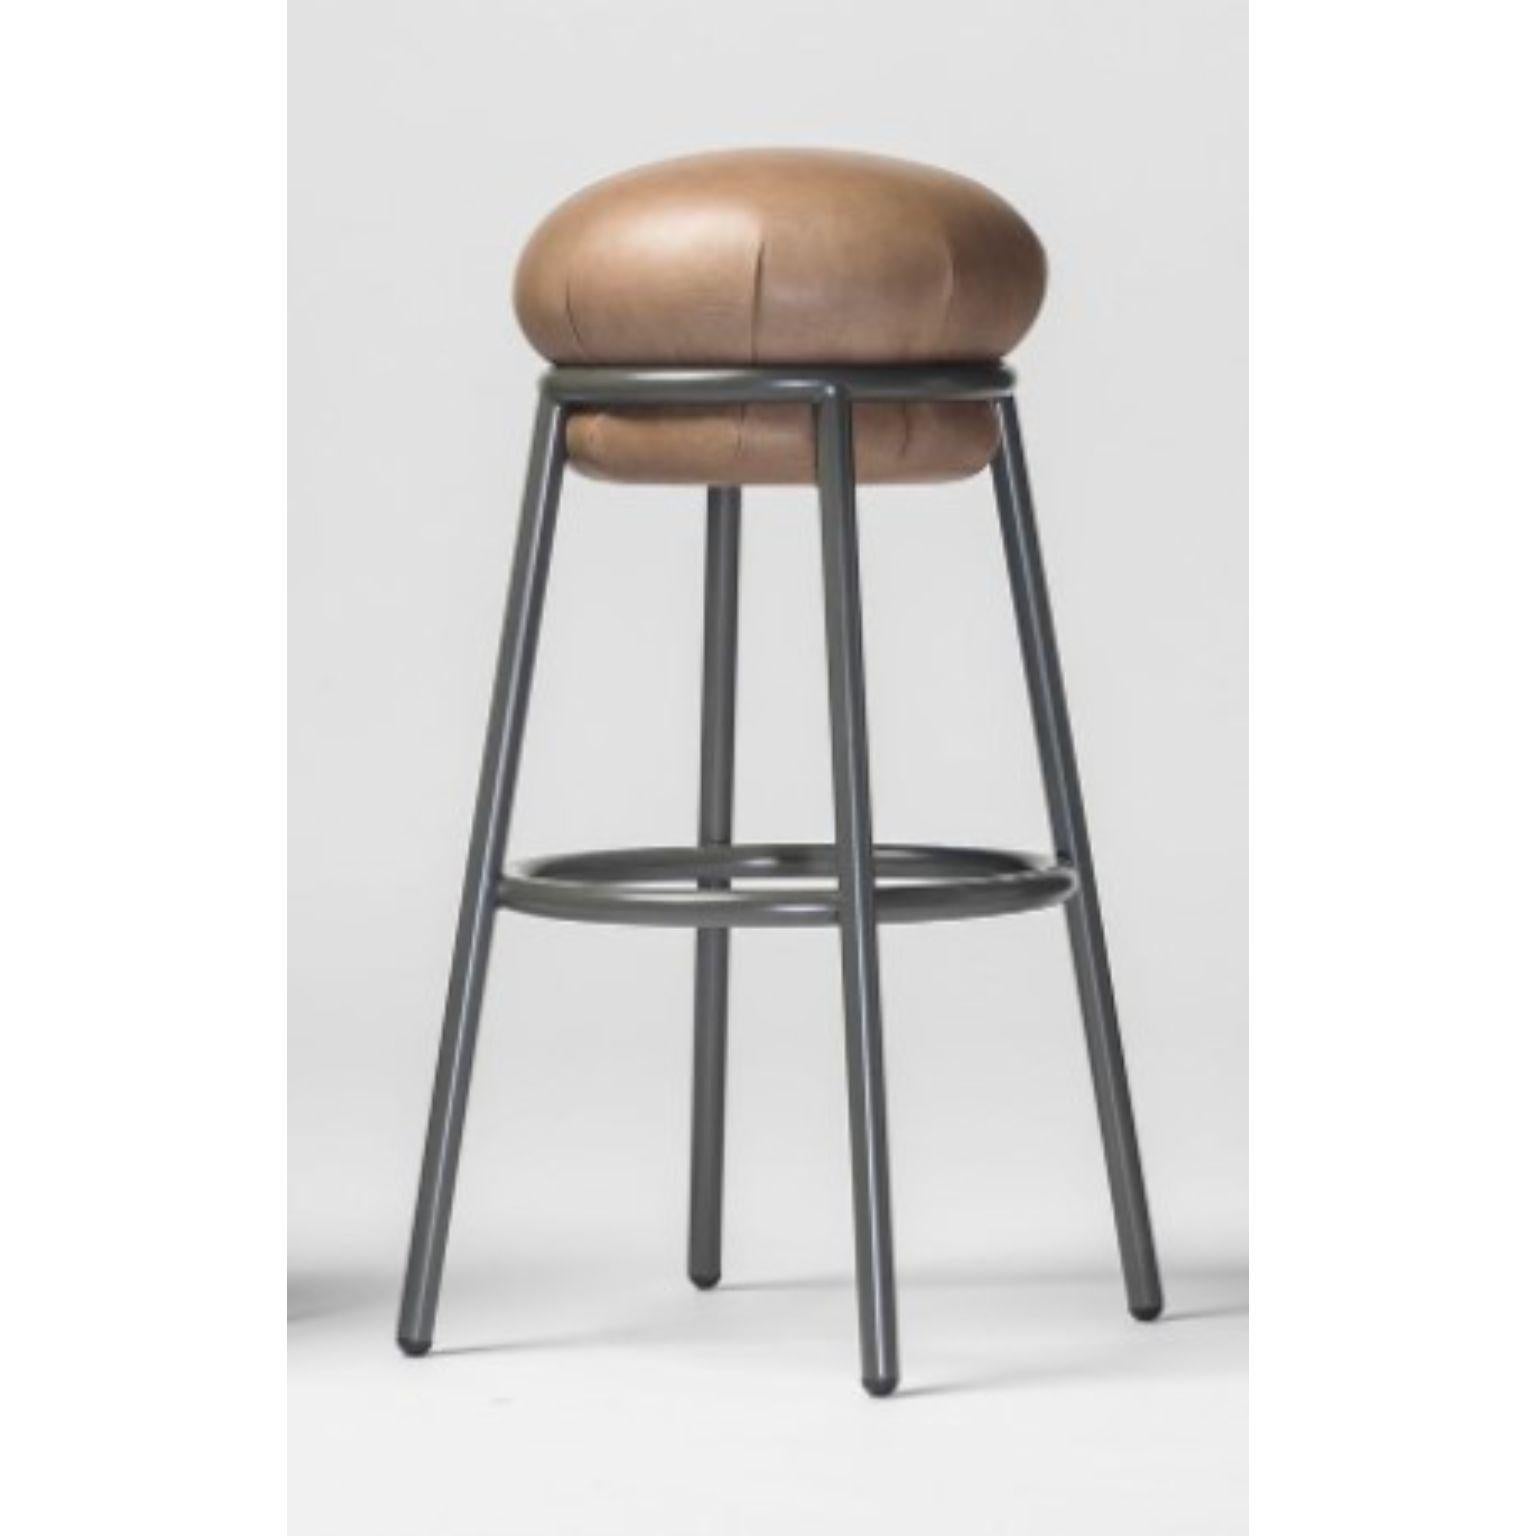 Grasso brown stool by Stephen Burks
Dimensions: diameter 39 x height 80 cm 
Materials: tubular steel frame (25 mm) stool upholstered in different materials provided by BD.
Available upholstered in different fabrics and in size Small.


The